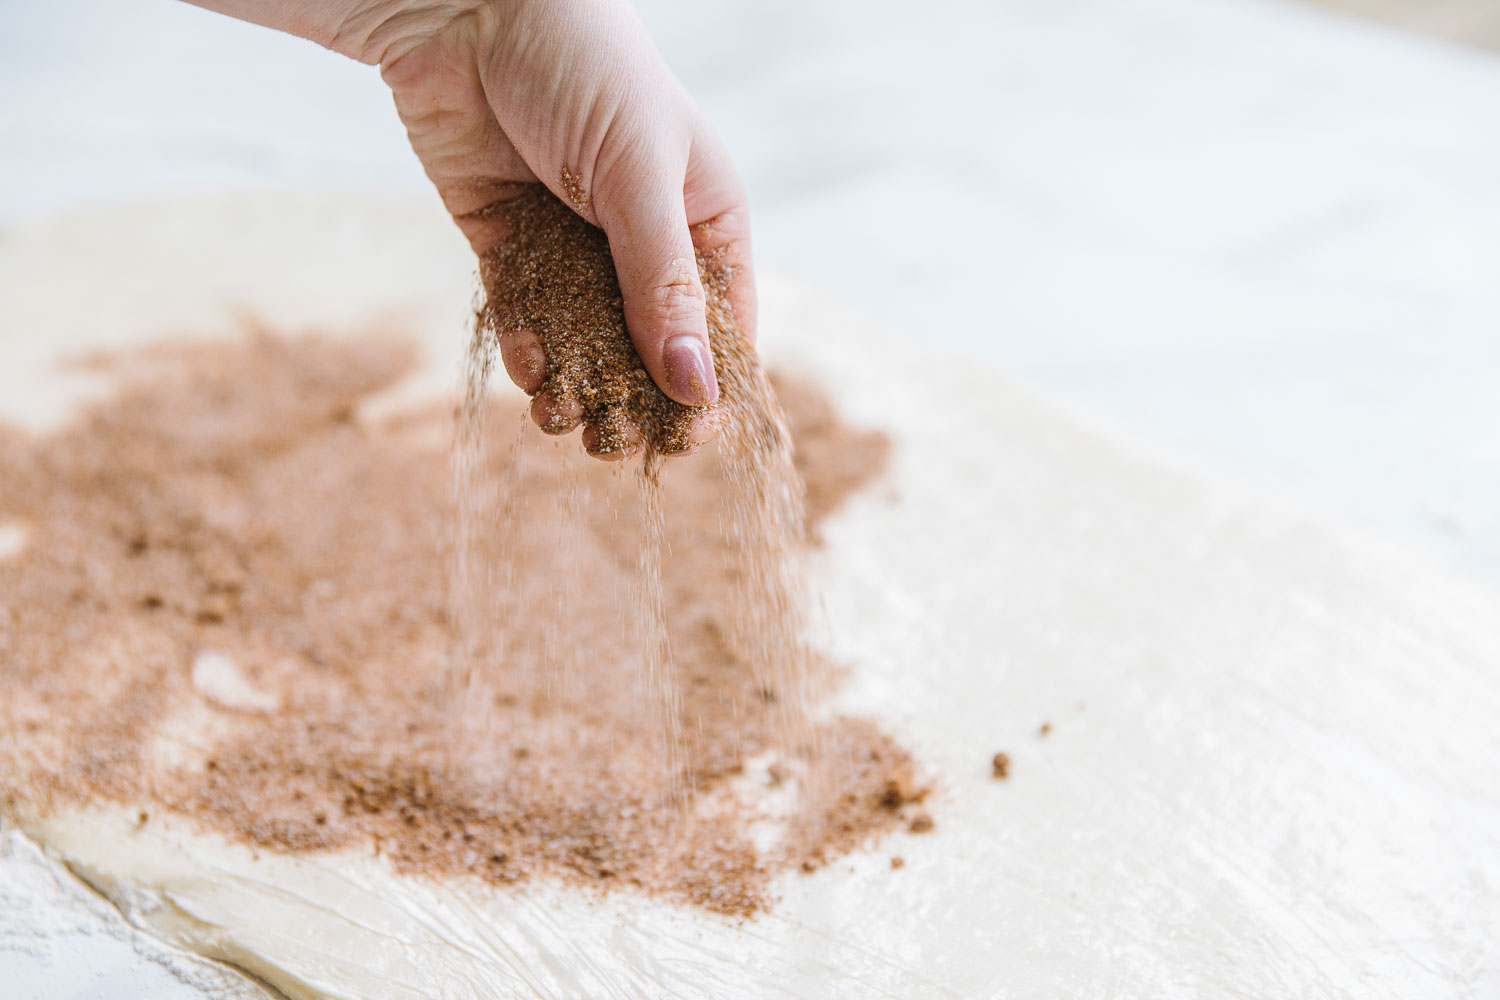 A hand sprinkling cinnamon and sugar mixture onto rolled-out dough.